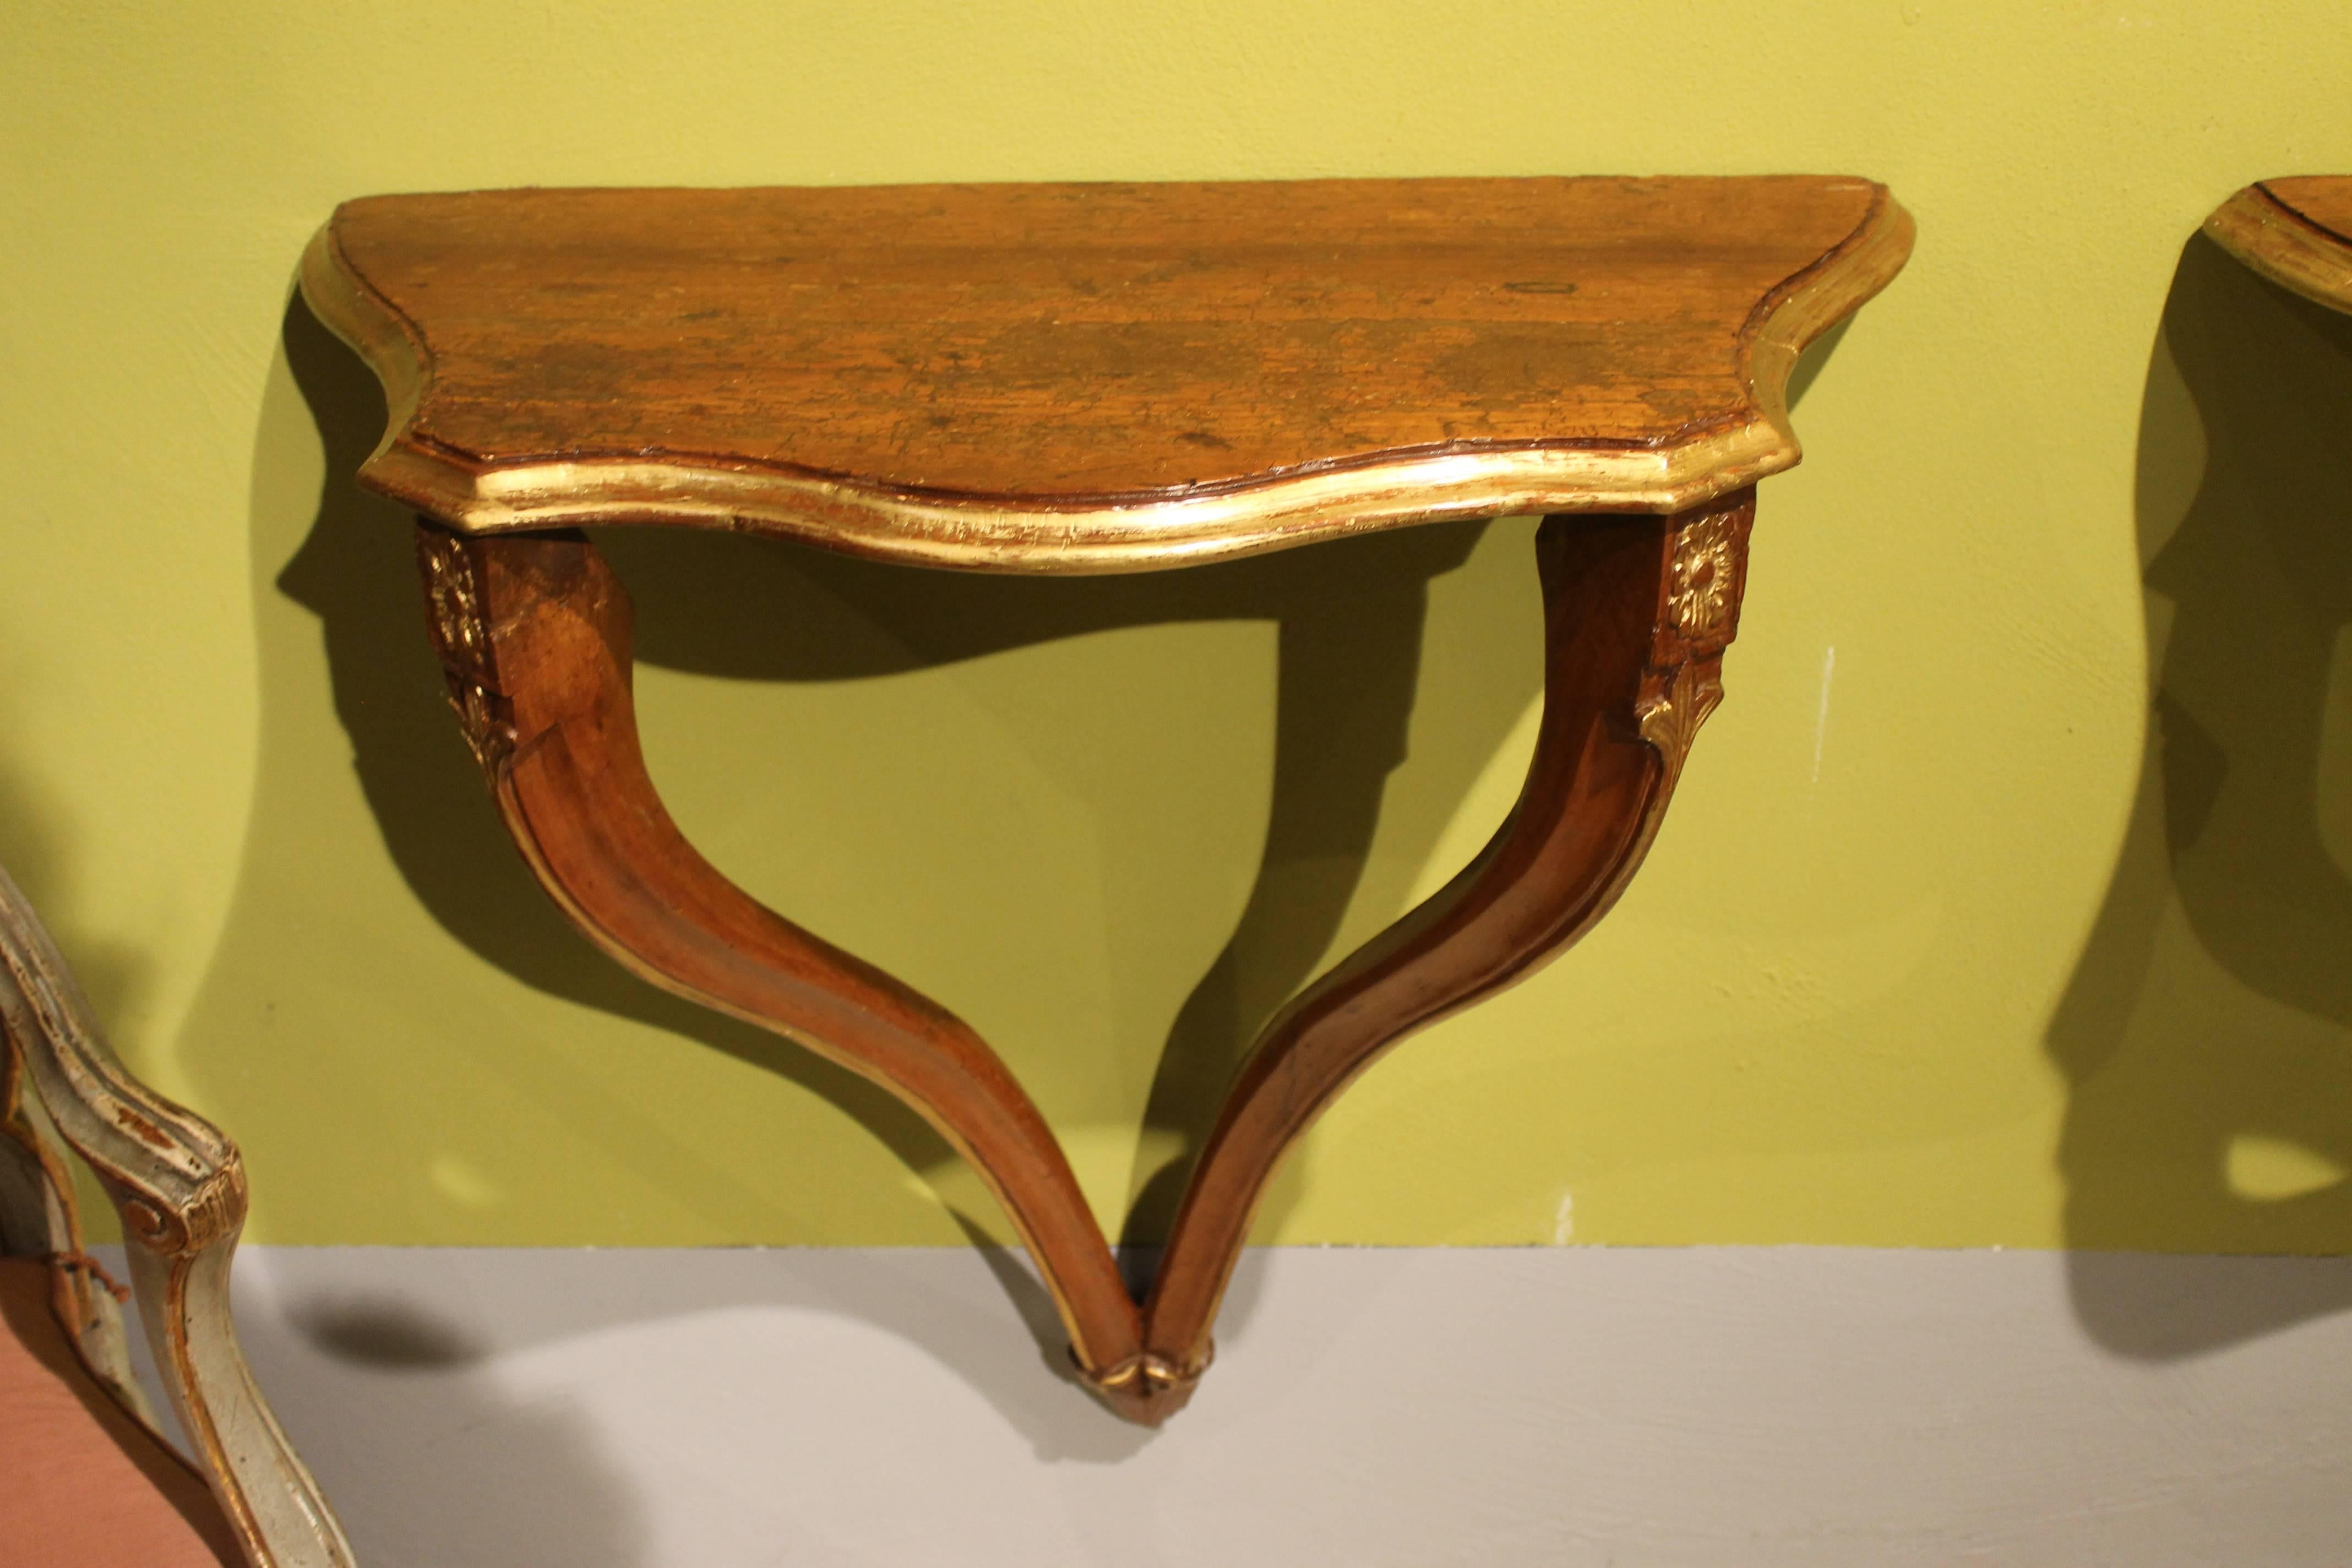 A beautiful serpentine shaped late 18th century Venetian Rococo wall-mounted console in a fantastic rich brown walnut wood with gilt accents. Molded top resting on two side cabriole legs joined at the bottom with acanthus carvings final. The